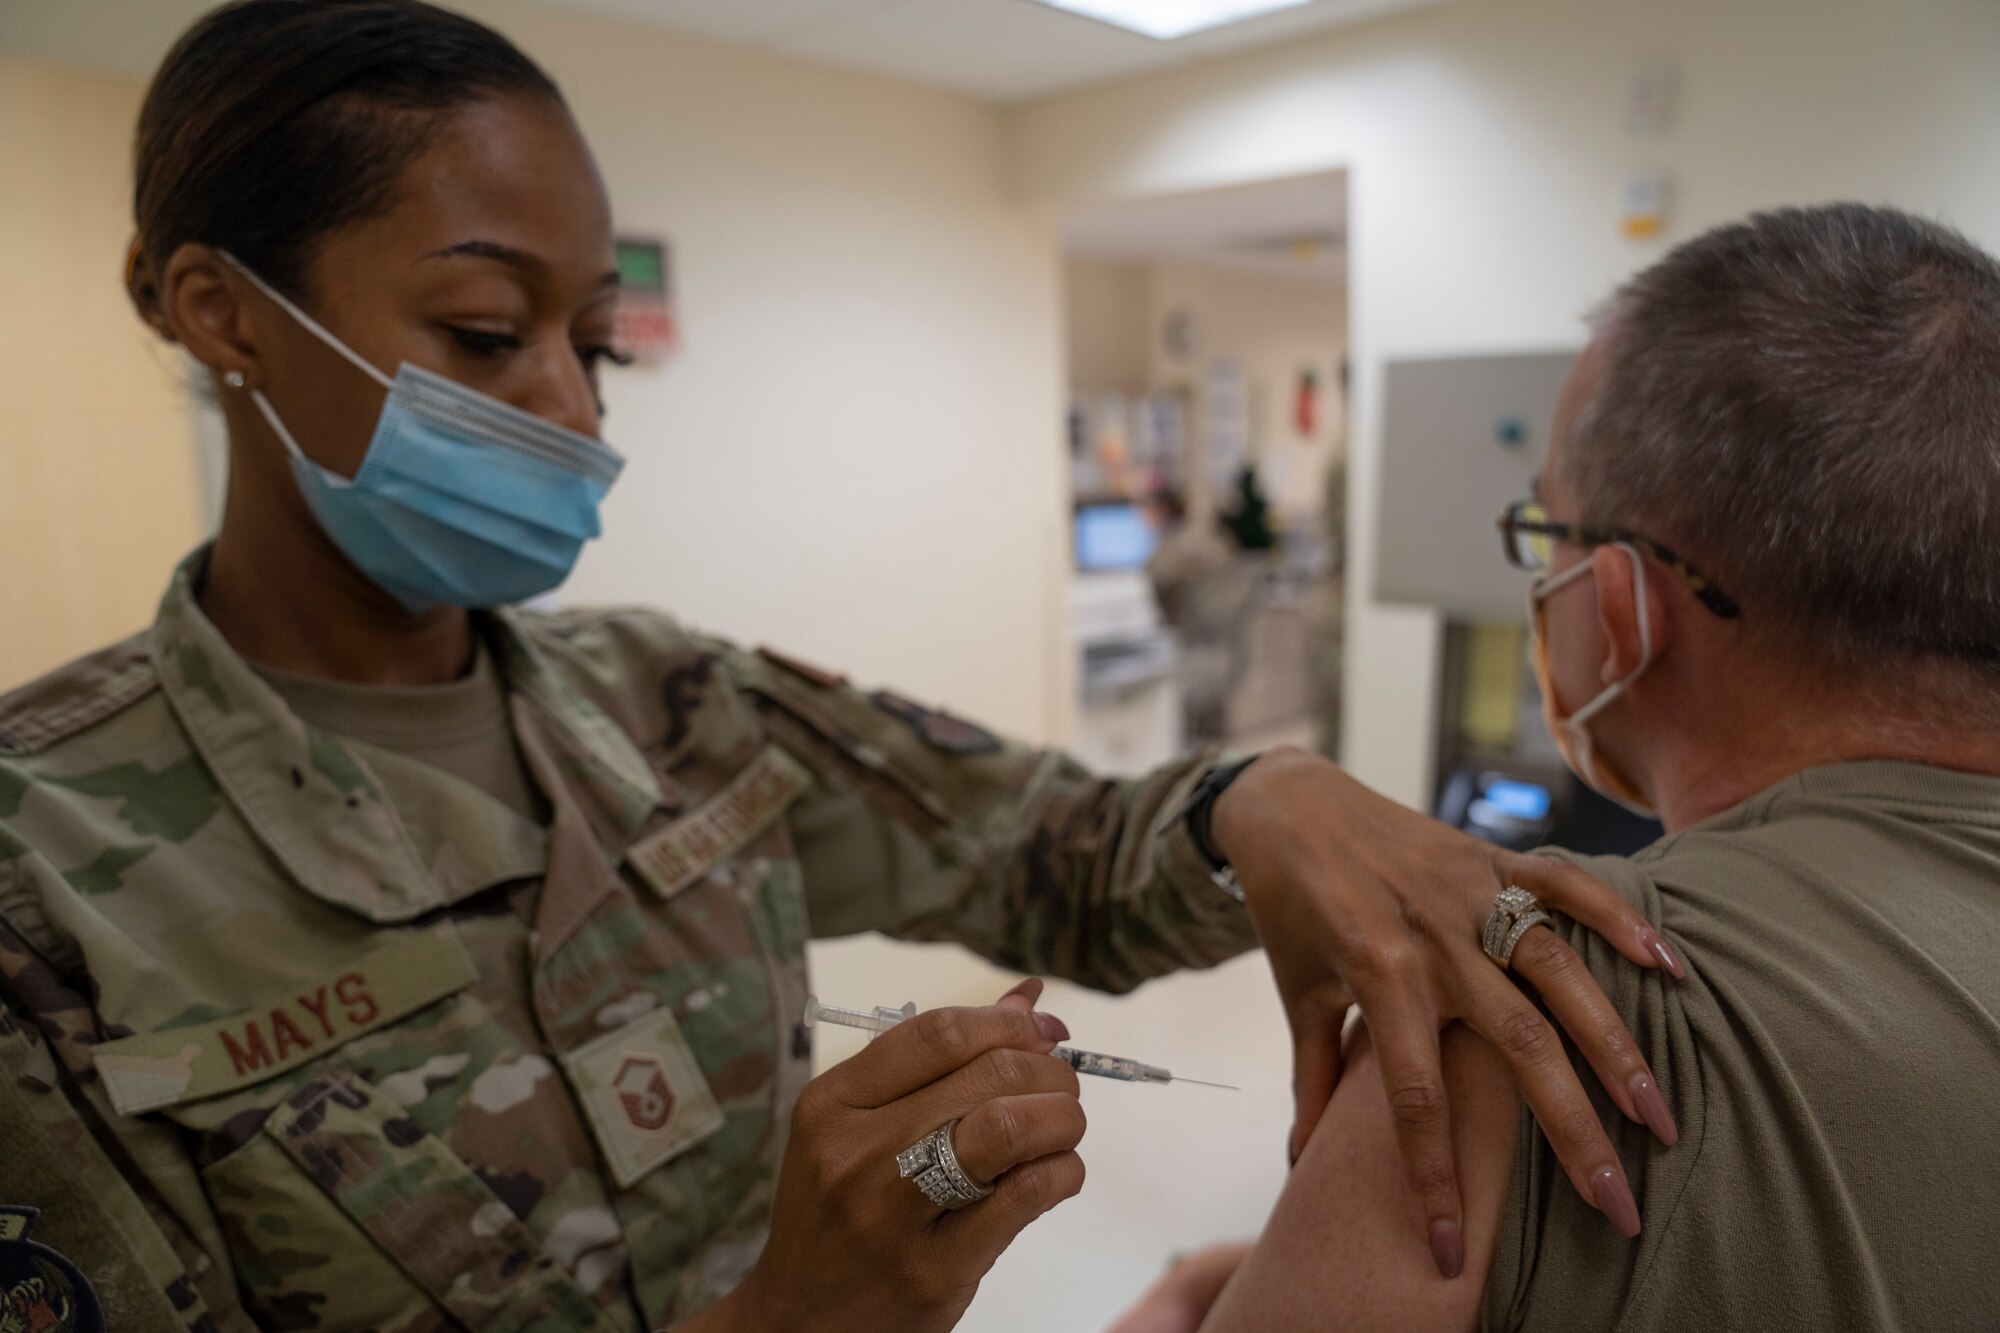 U.S. Air Force Master Sgt. La'Kisha Mays, 81st Healthcare Operations Squadron medical specialties flight chief, administers the COVID-19 vaccine to Col. Wayne Latack, 81st Medical Group internal medicine residency program director, inside the Keesler Medical Center at Keesler Air Force Base, Mississippi, Dec. 21, 2020. Members of the 81st MDG administered the COVID-19 vaccine to Keesler first responders and members of the Armed Forces Retirement Home in Gulfport, Mississippi. (U.S. Air Force photo by Airman 1st Class Kimberly L. Mueller)